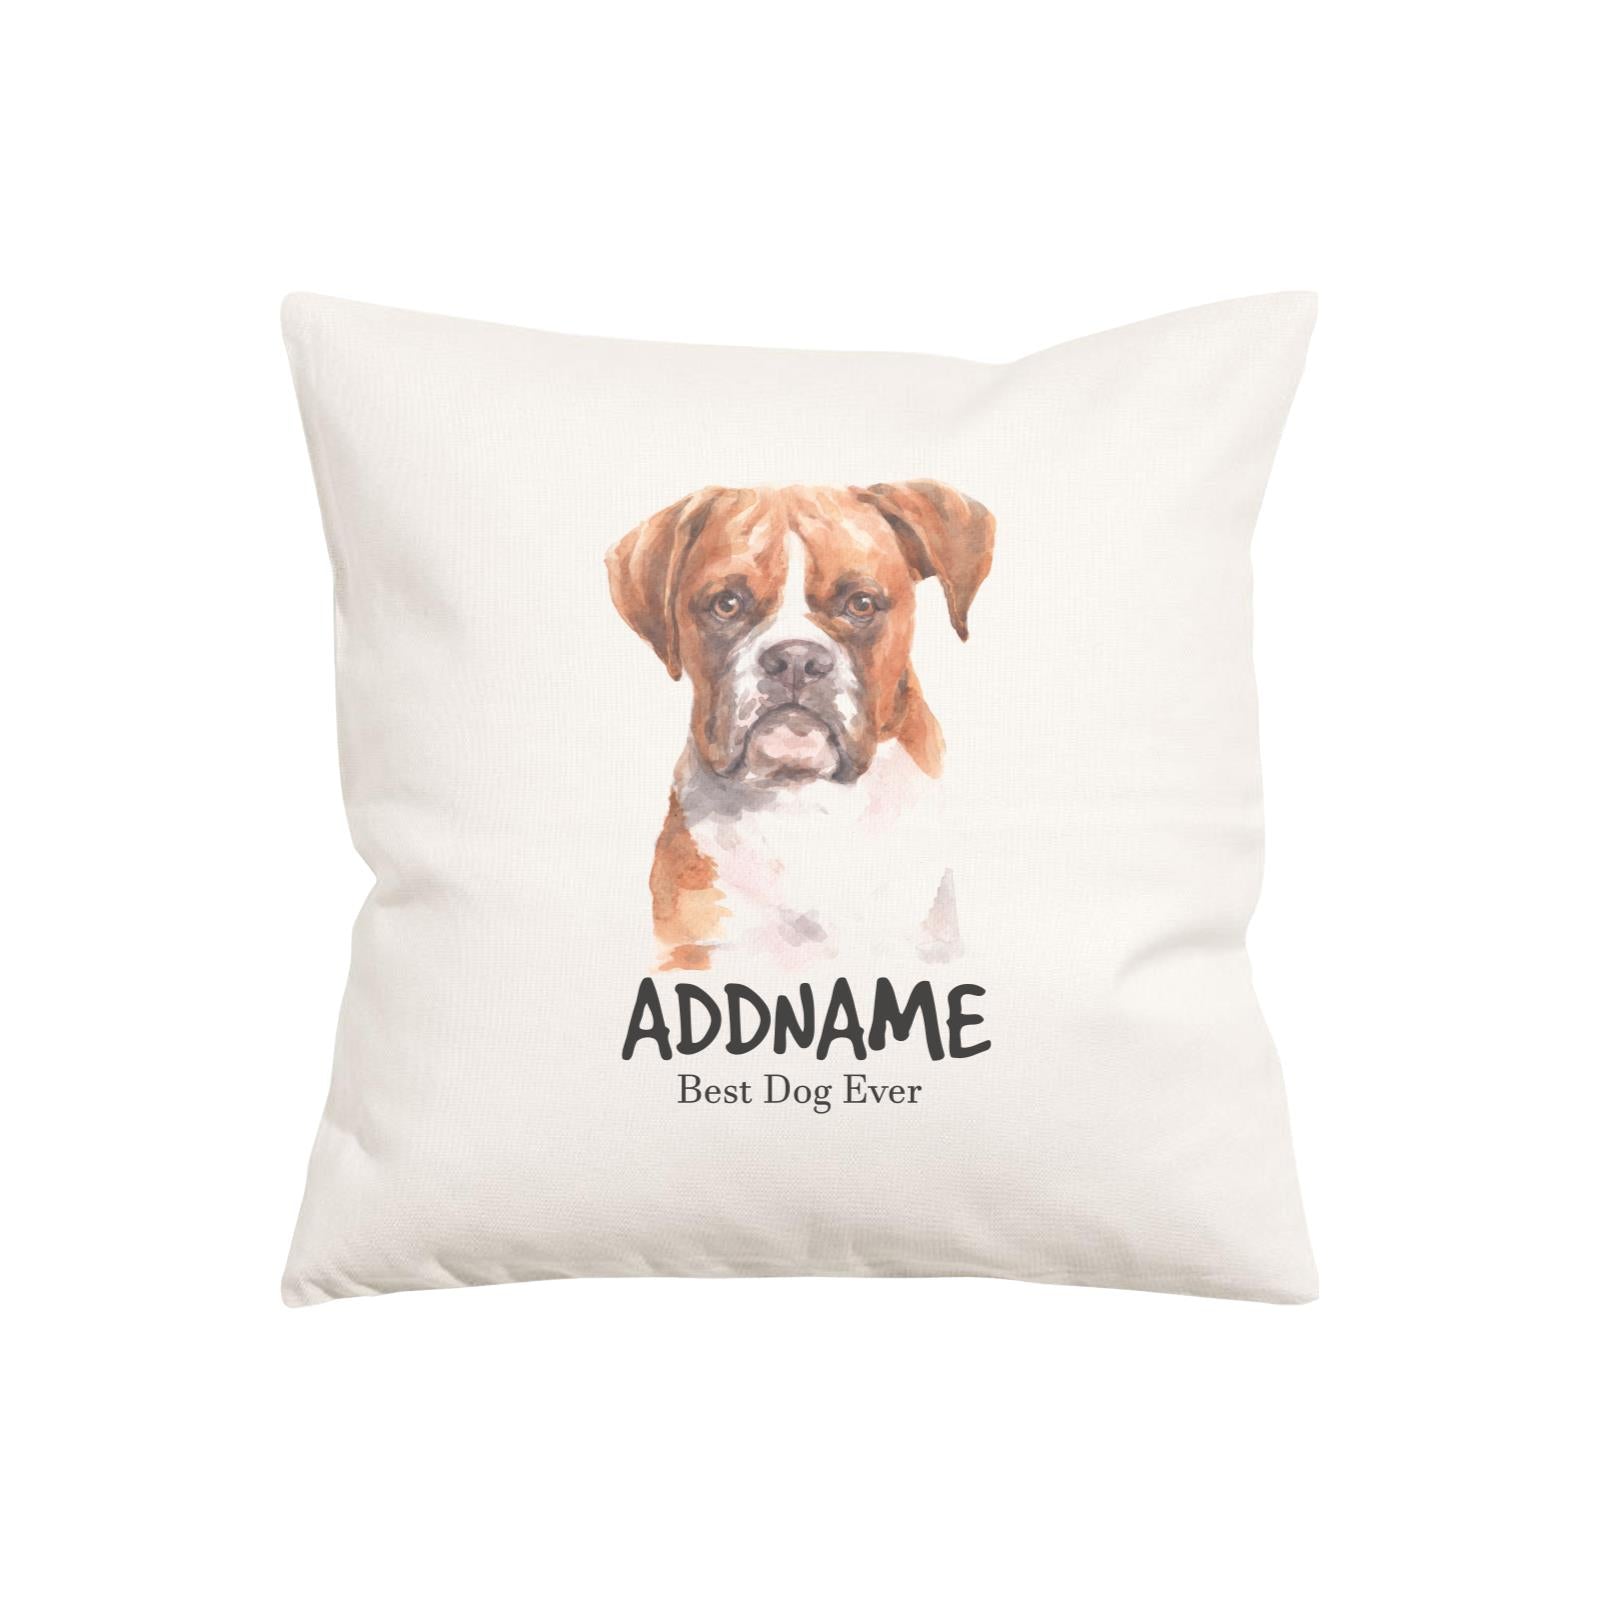 Watercolor Dog Series Boxer Brown Ears Best Dog Ever Addname Pillow Cushion